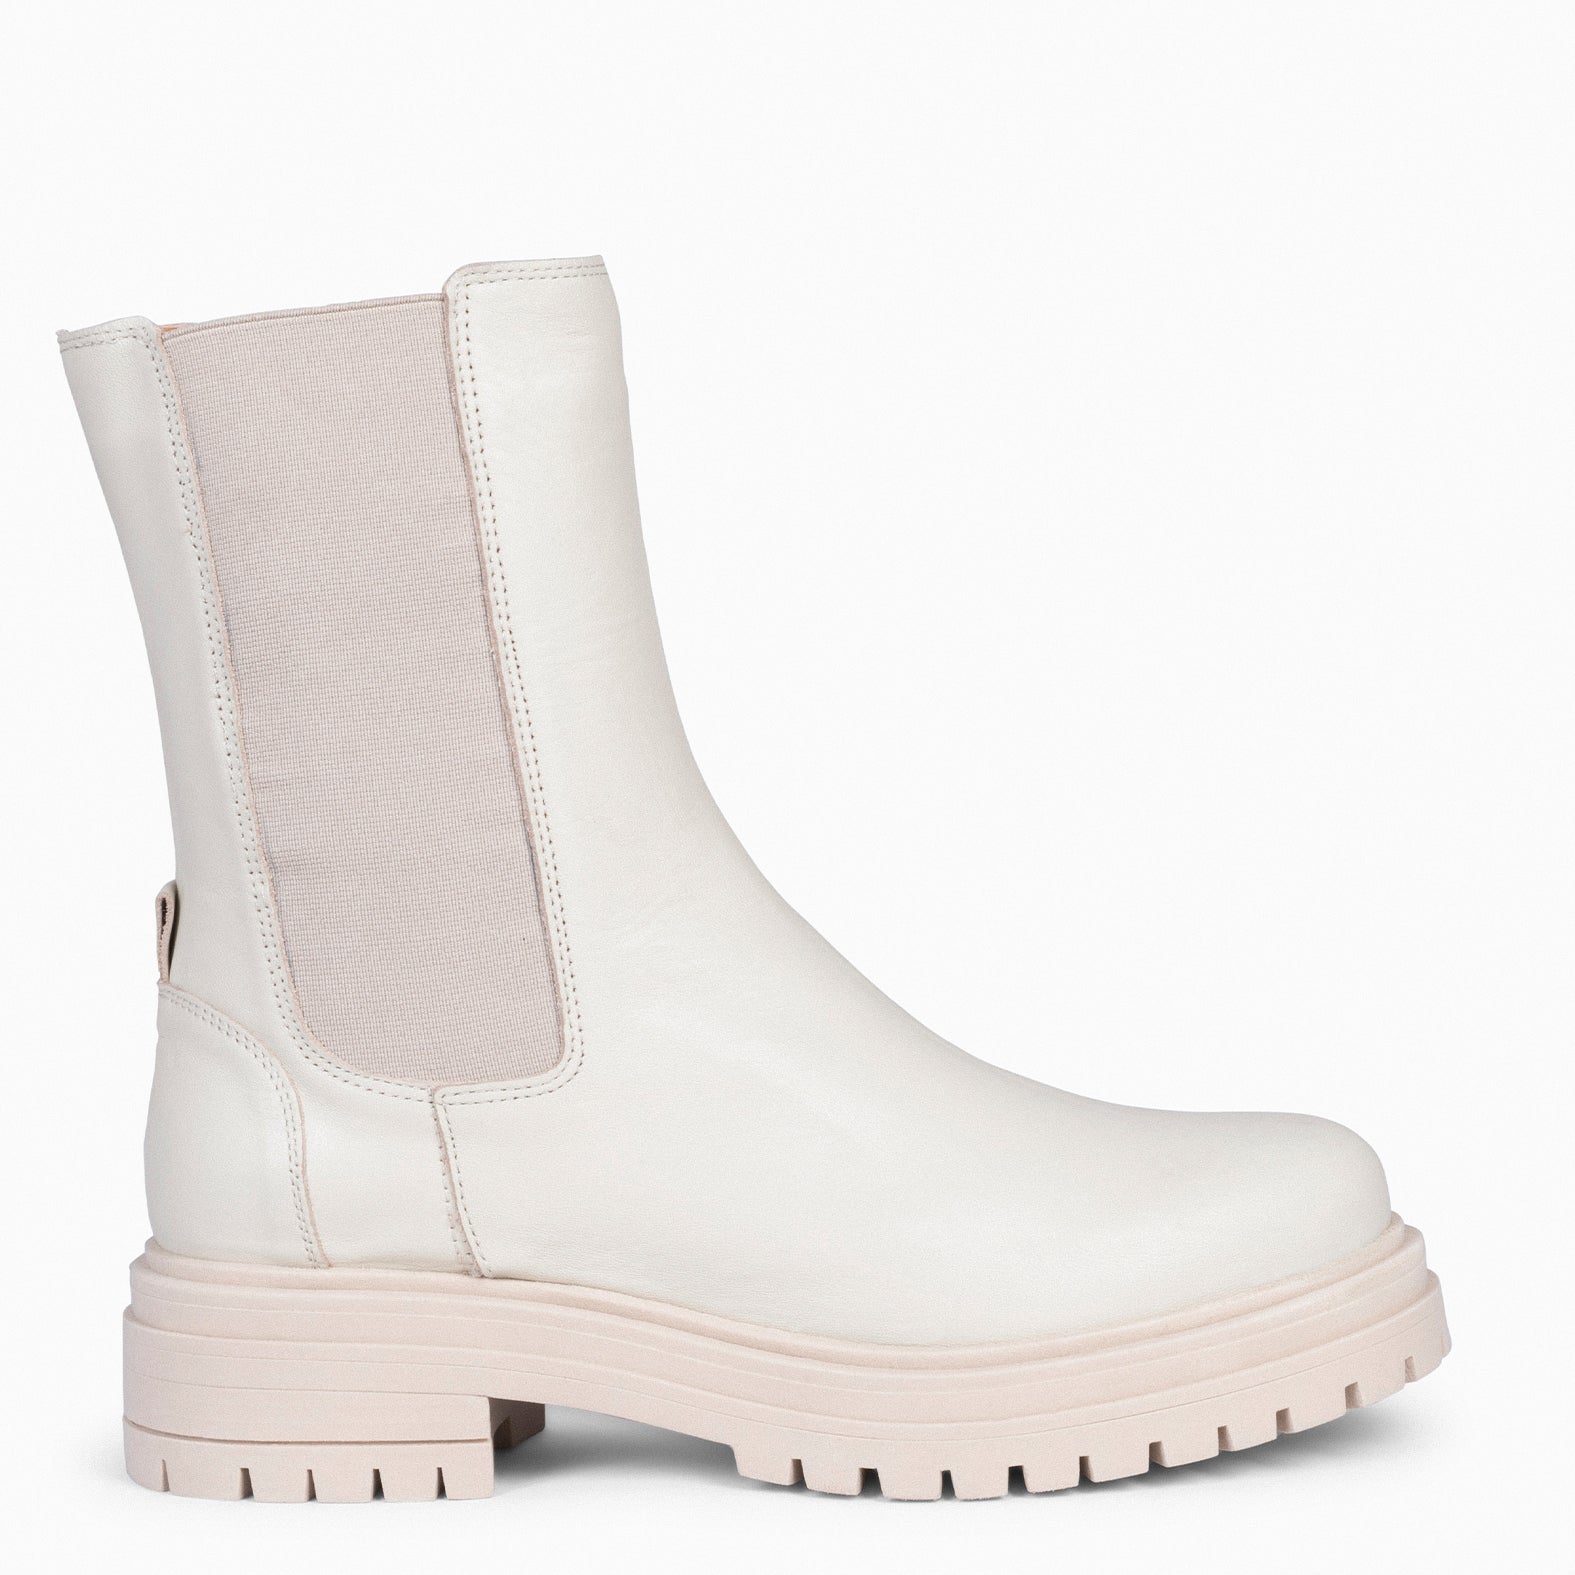 STANFORD – CREAM Chelsea Boots with Track Platform